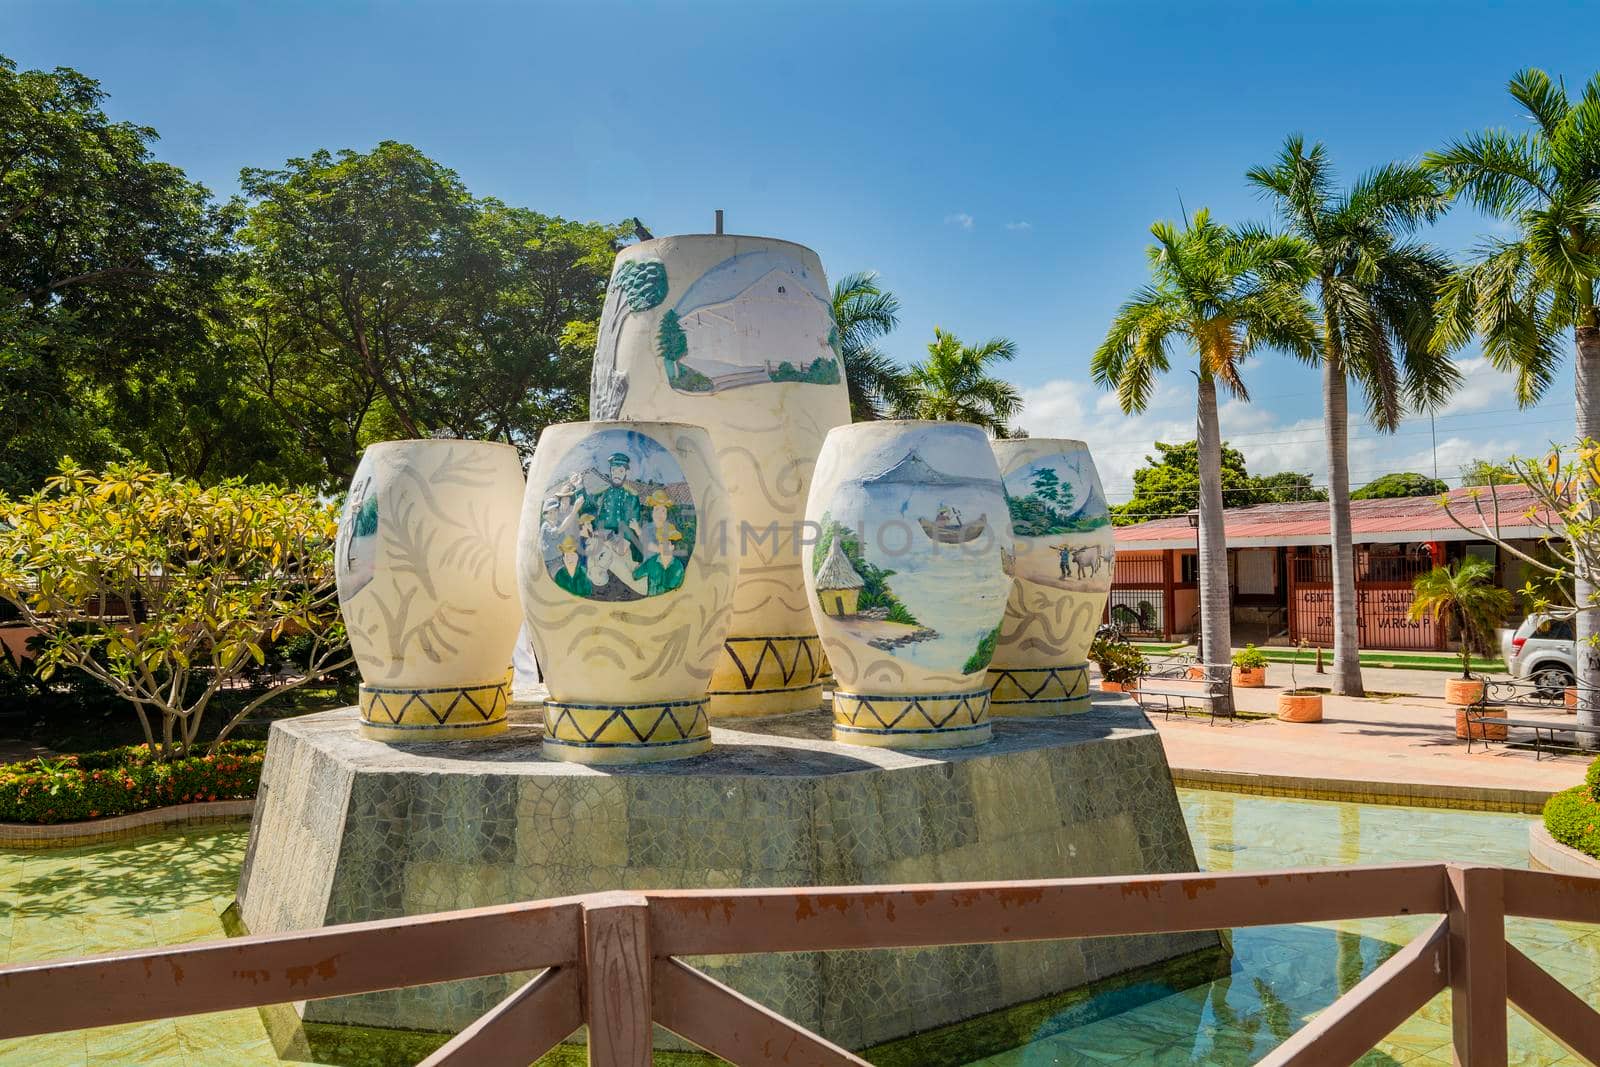 Las Jicaras cultural fountain in Nagarote, Nicaragua. Cultural gourds in the middle of a fountain on a sunny day. LAS JICARAS fountain in Nagarote park by isaiphoto